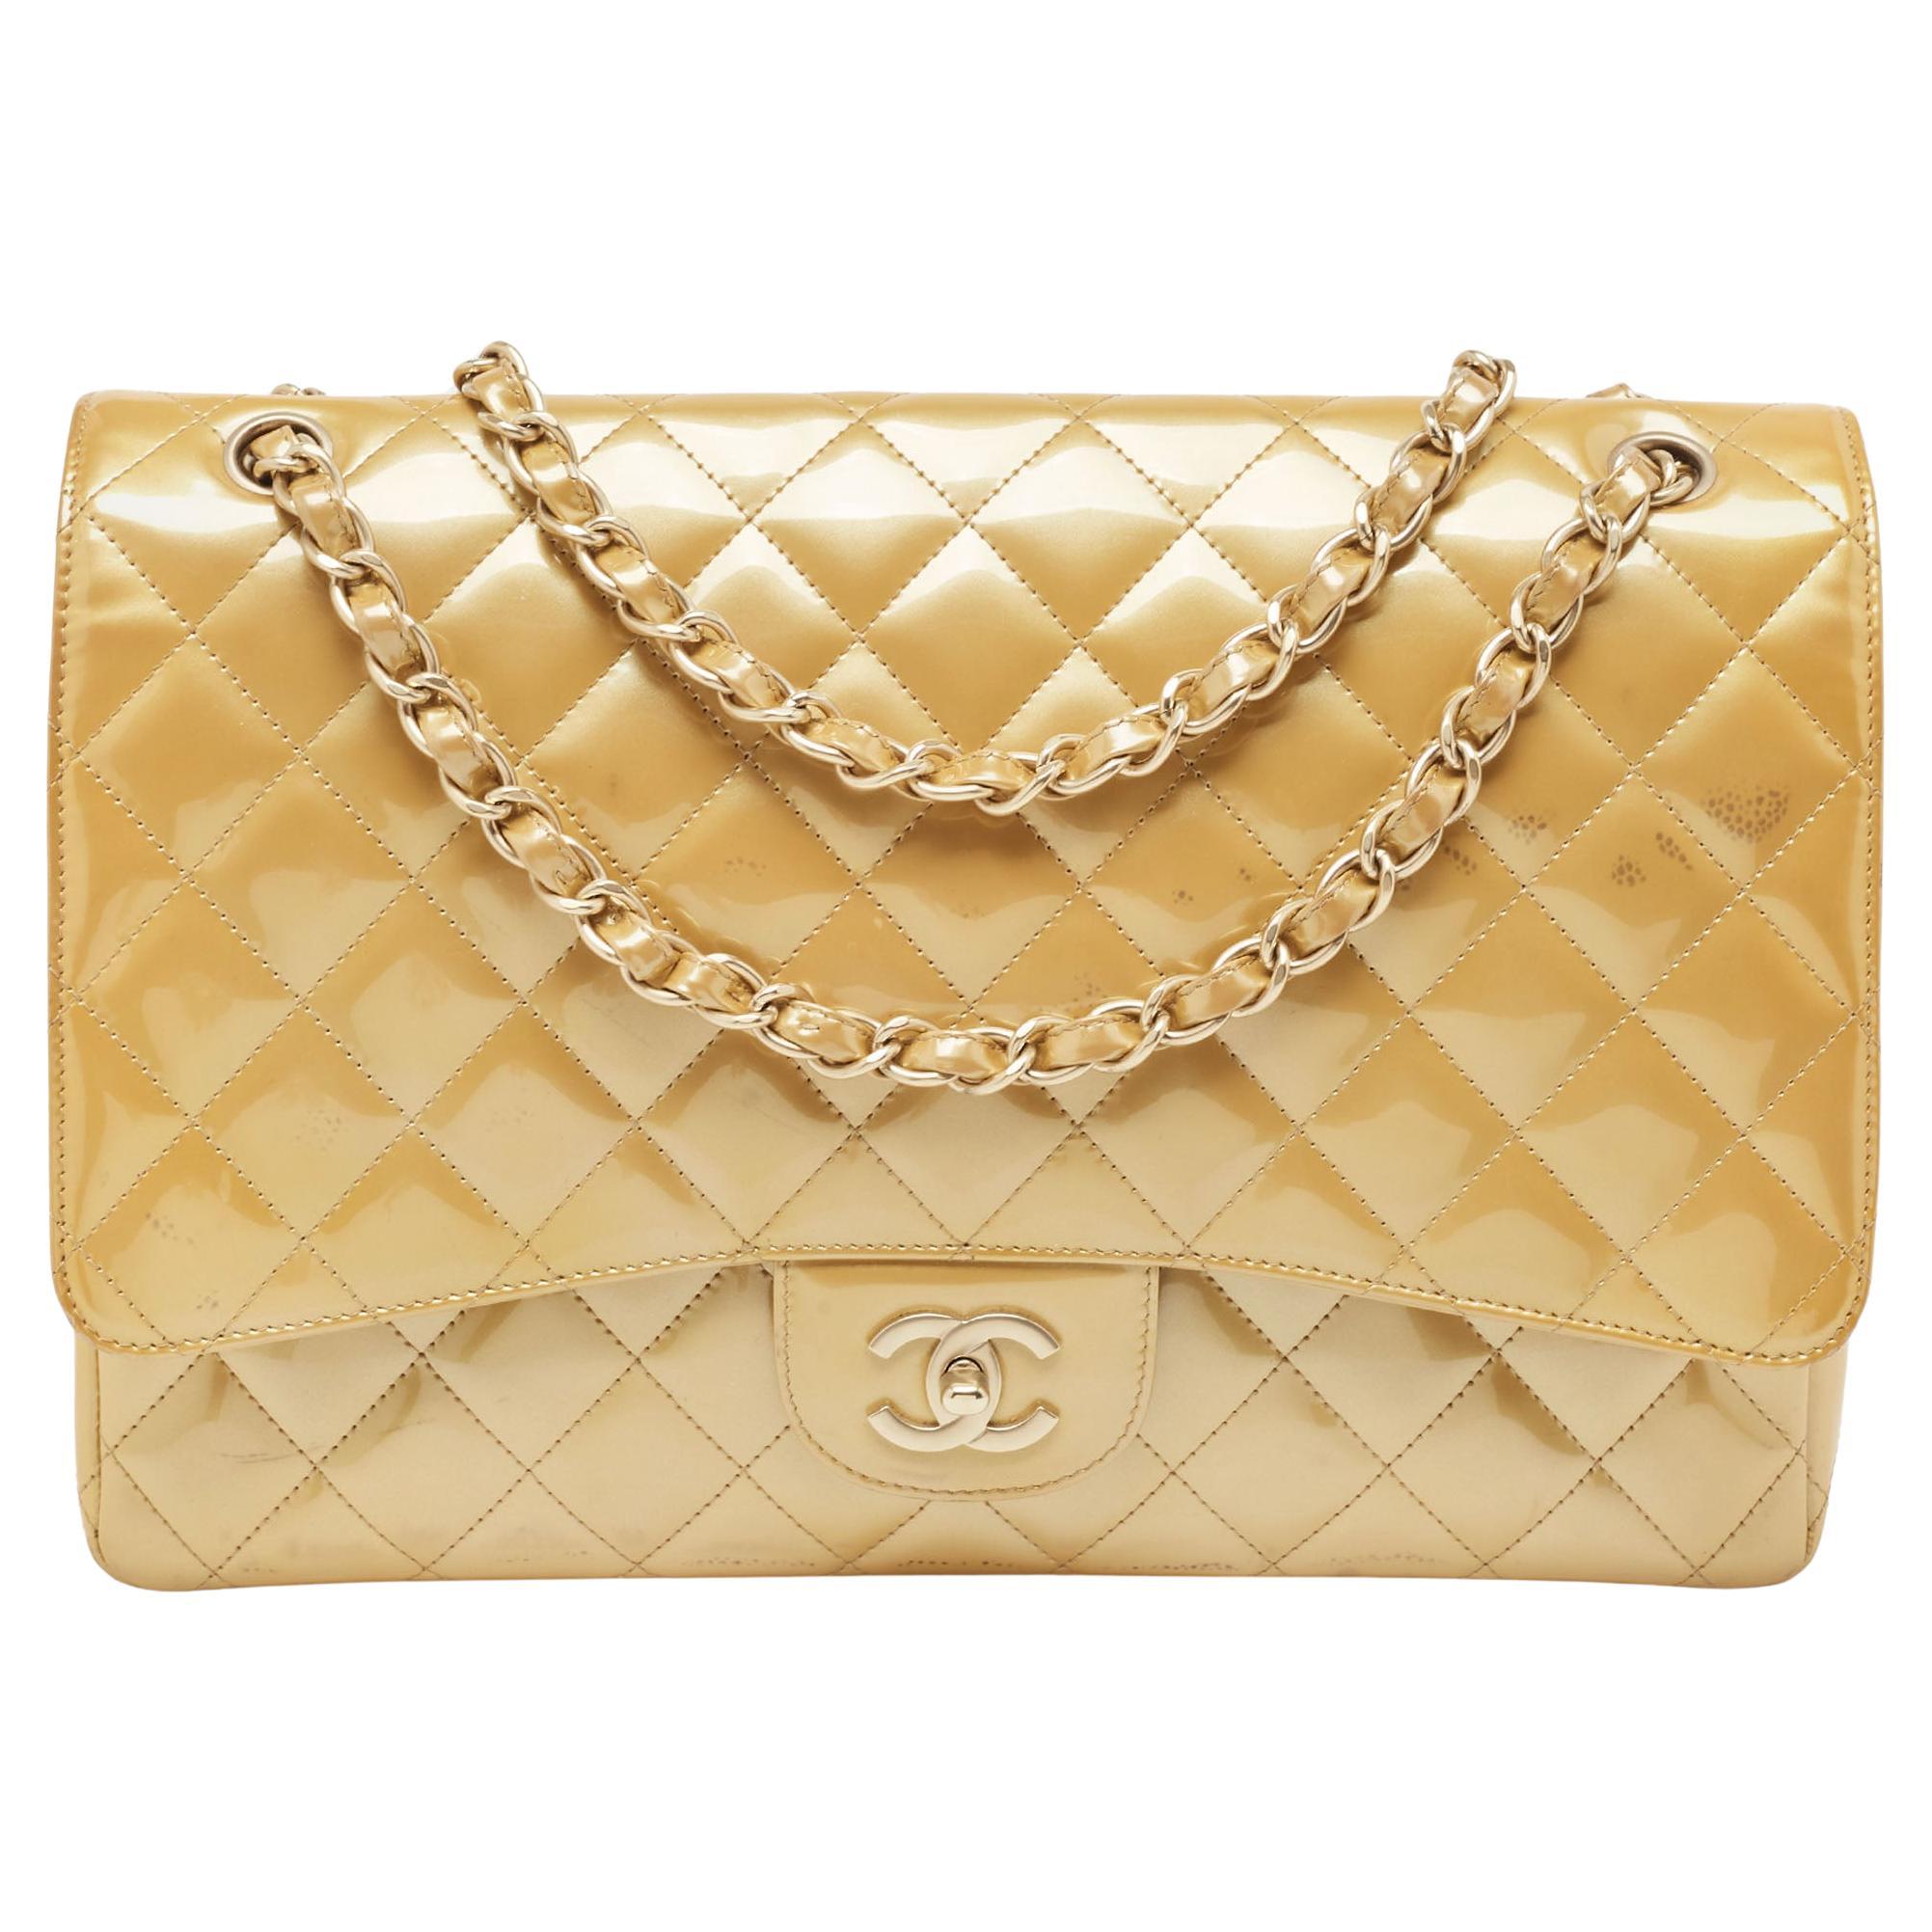 Chanel Cream Quilted Patent Leather Maxi Classic Single Flap Bag For Sale